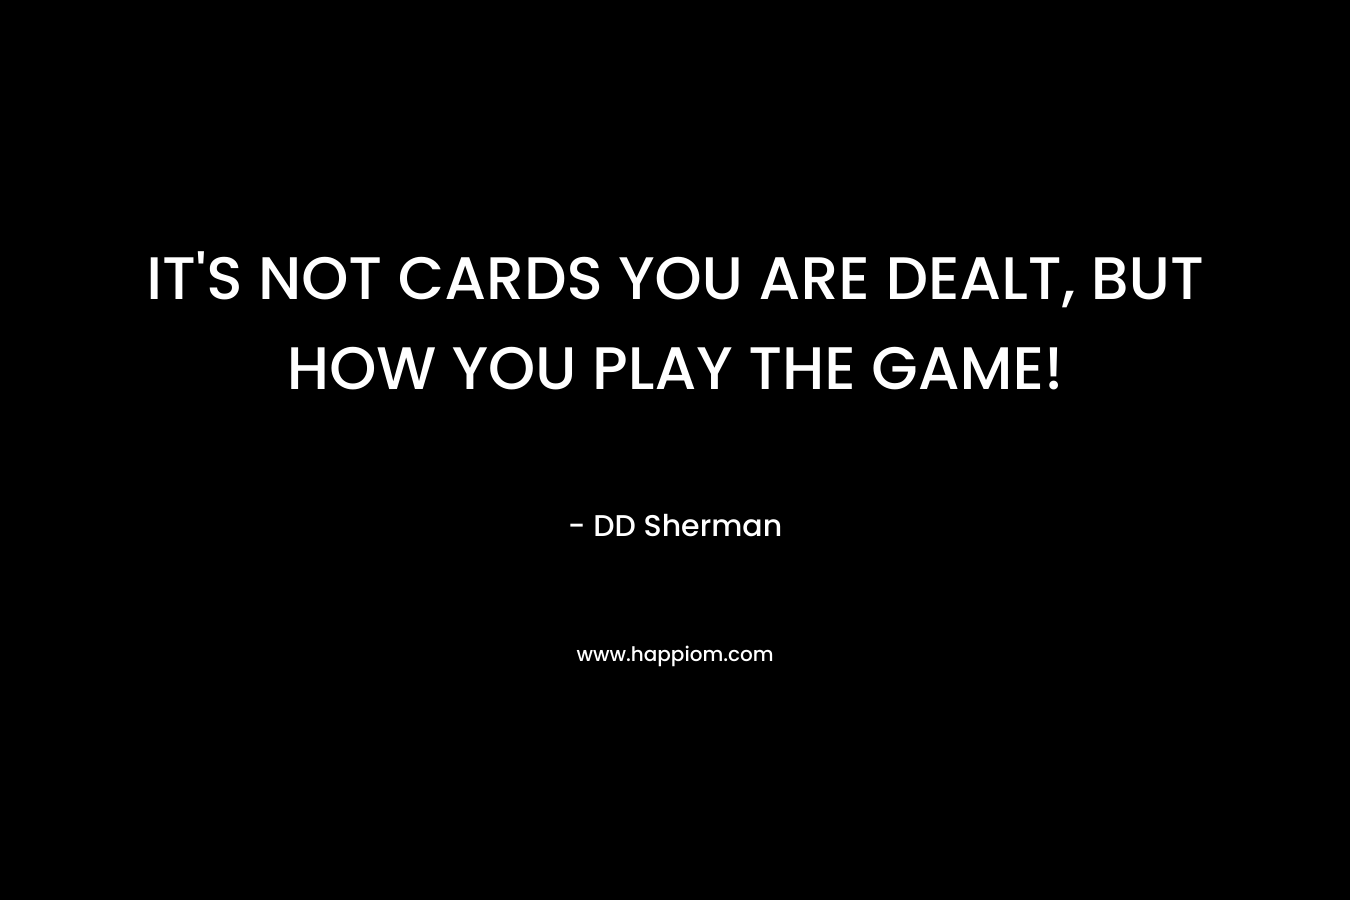 IT’S NOT CARDS YOU ARE DEALT, BUT HOW YOU PLAY THE GAME! – DD Sherman